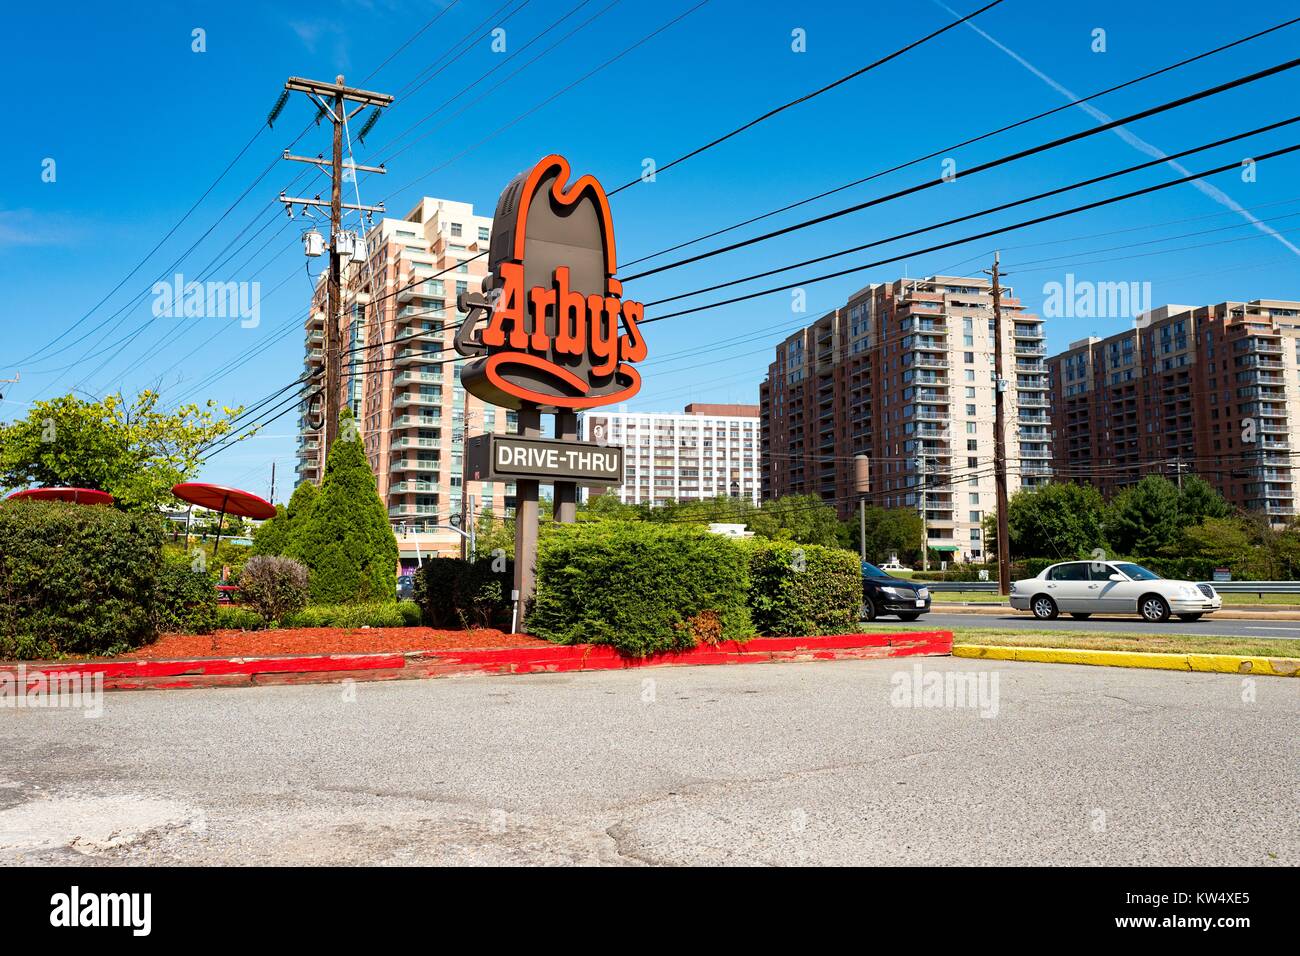 Signage for Arbys fast food restaurant in Rockville, Maryland, September 25, 2016. Situated close to Washington, DC, Rockville is a popular city among Federal government employees and contractors. Stock Photo